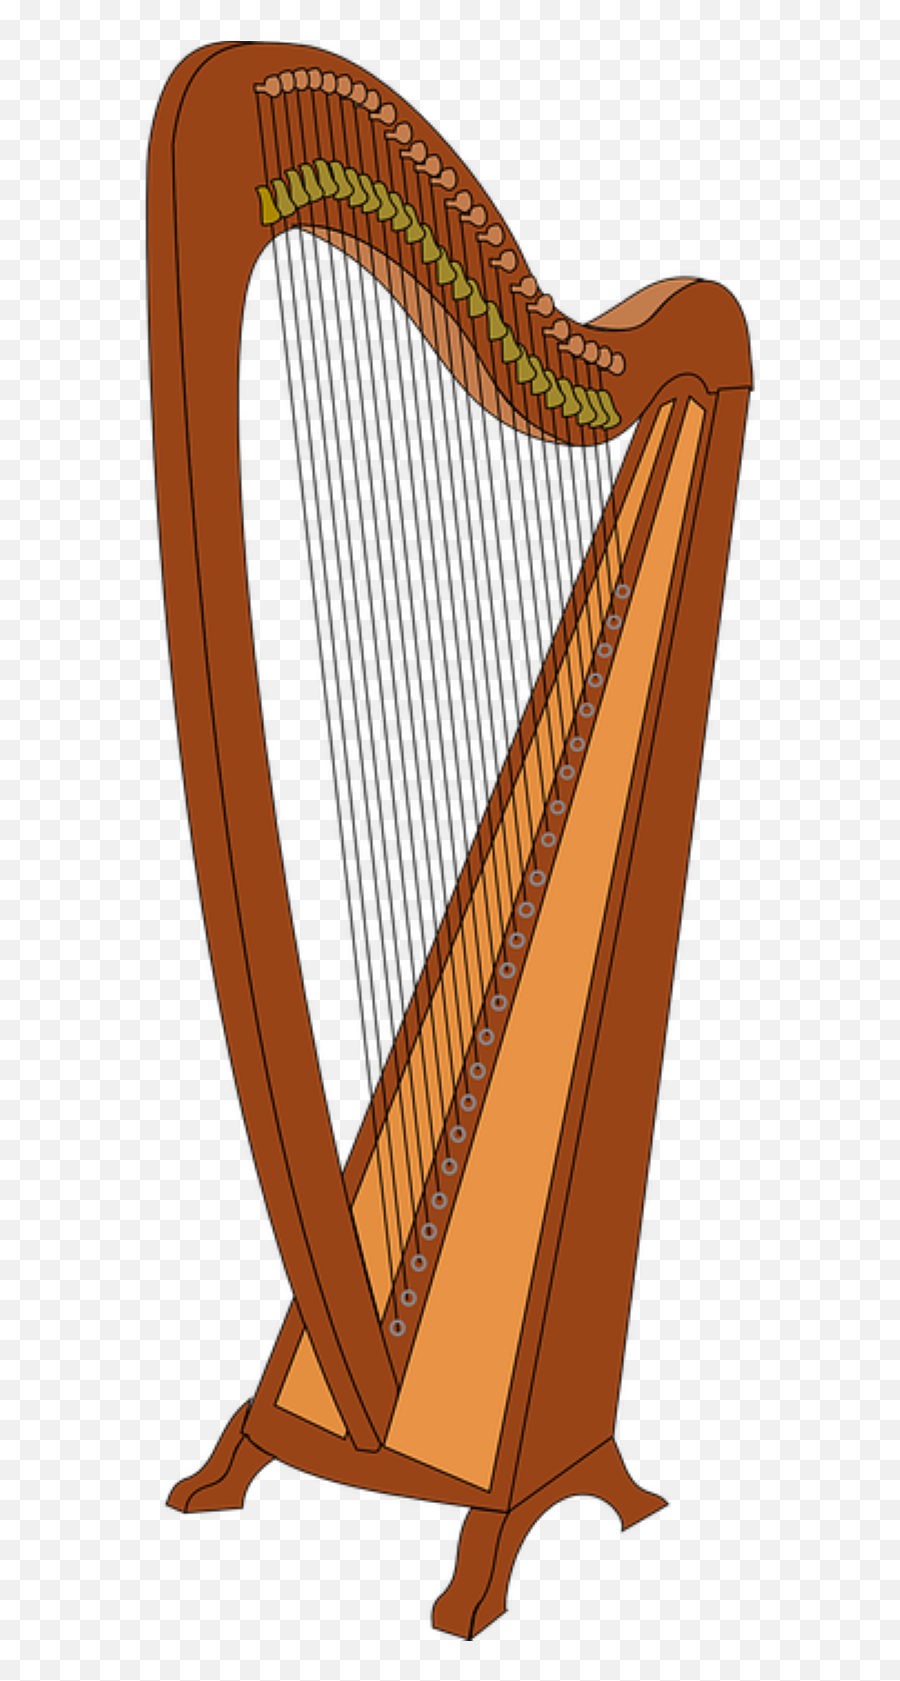 14 Celtic Symbols And Their Meanings - Ireland Travel Guides Clipart Harp Emoji,What Does The Spikey Heart Emoticon Mean